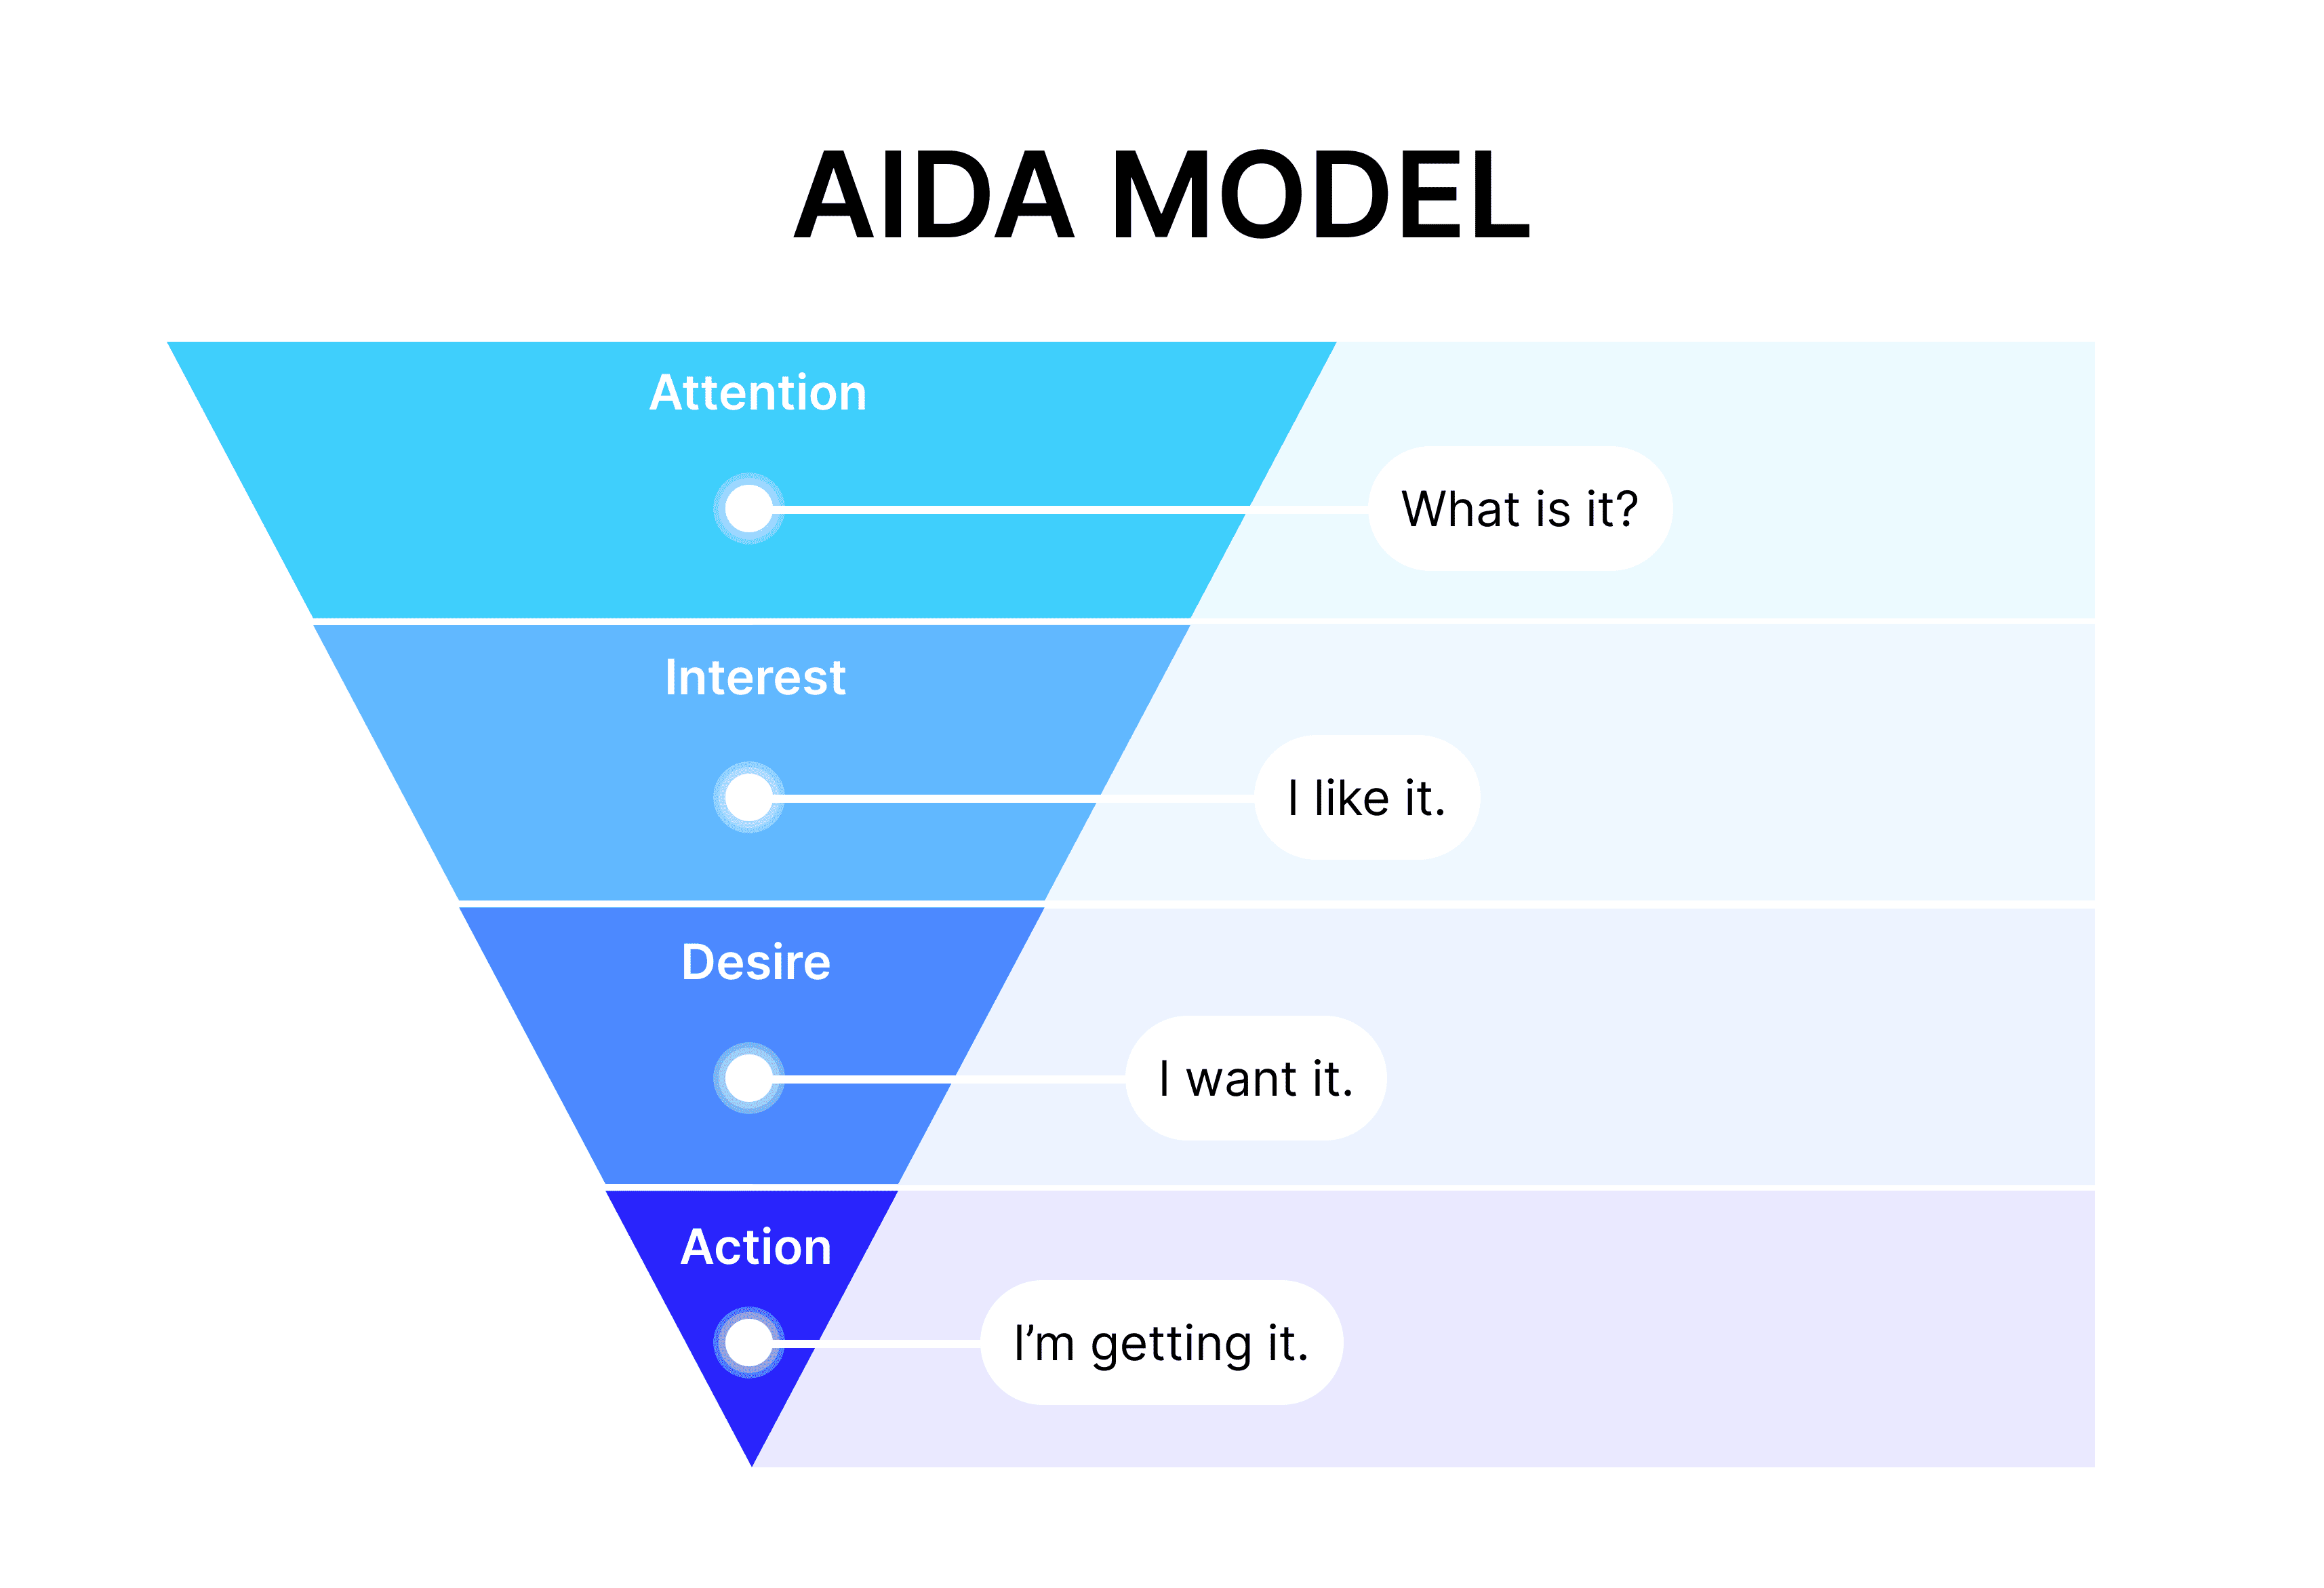 AIDA Model - a concept used by Alex Turnbull that every non tech founder should understand